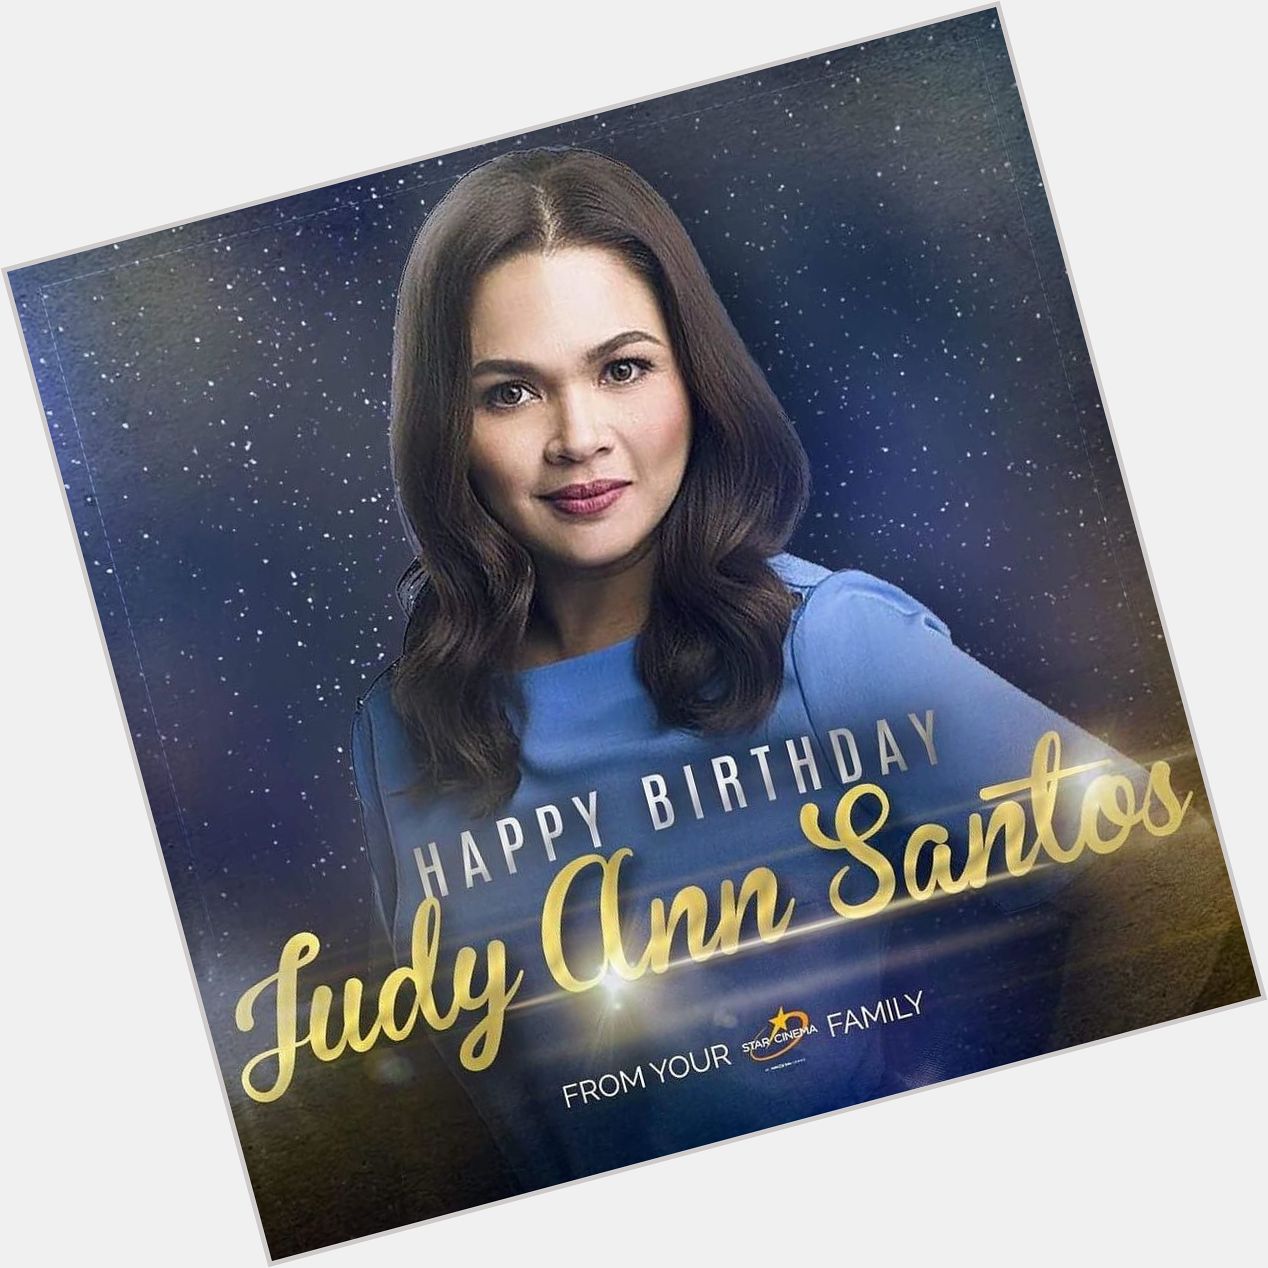 Happy birthday to the one and only Queen of Philippine Soap Operas Judy Ann Santos from your Star Cinema family!   